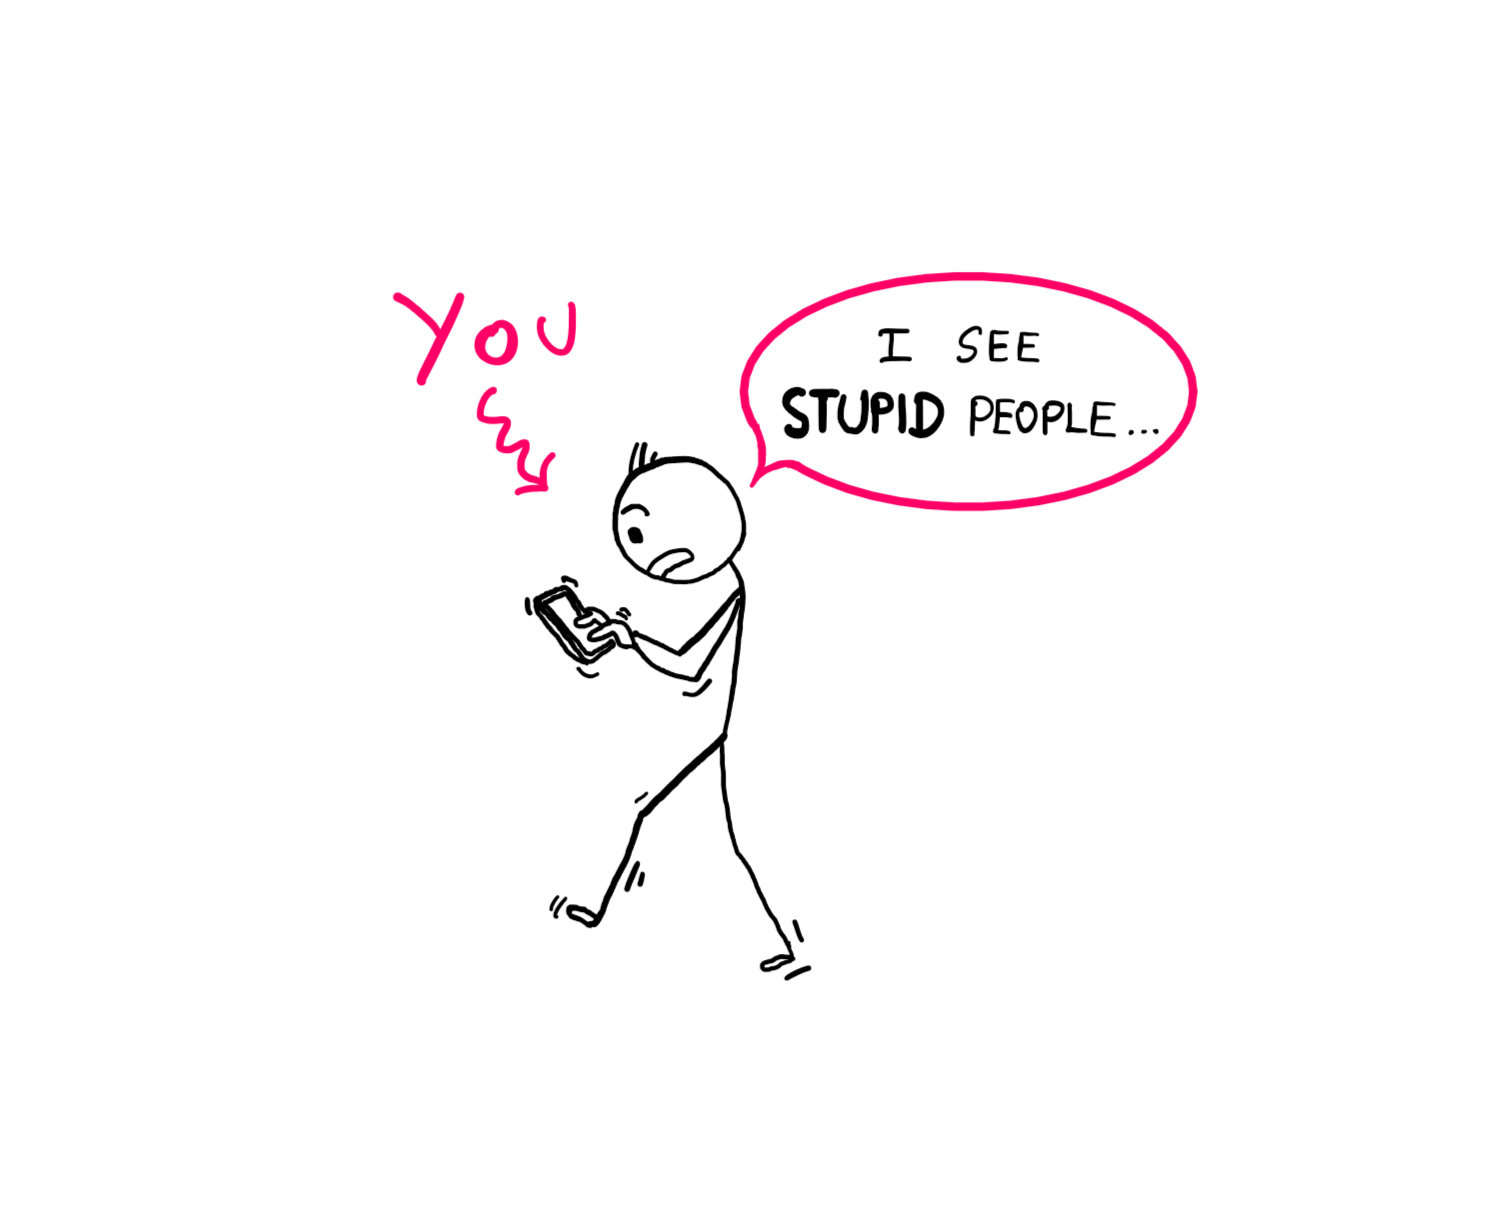 Why Do Stupid People Think They Are Smart? - An illustration showing a stick figure walking with a phone and carrying a shocked expression. An arrow pointing to the stick figure reads "You". The stick figure says, "I see stupid people…"